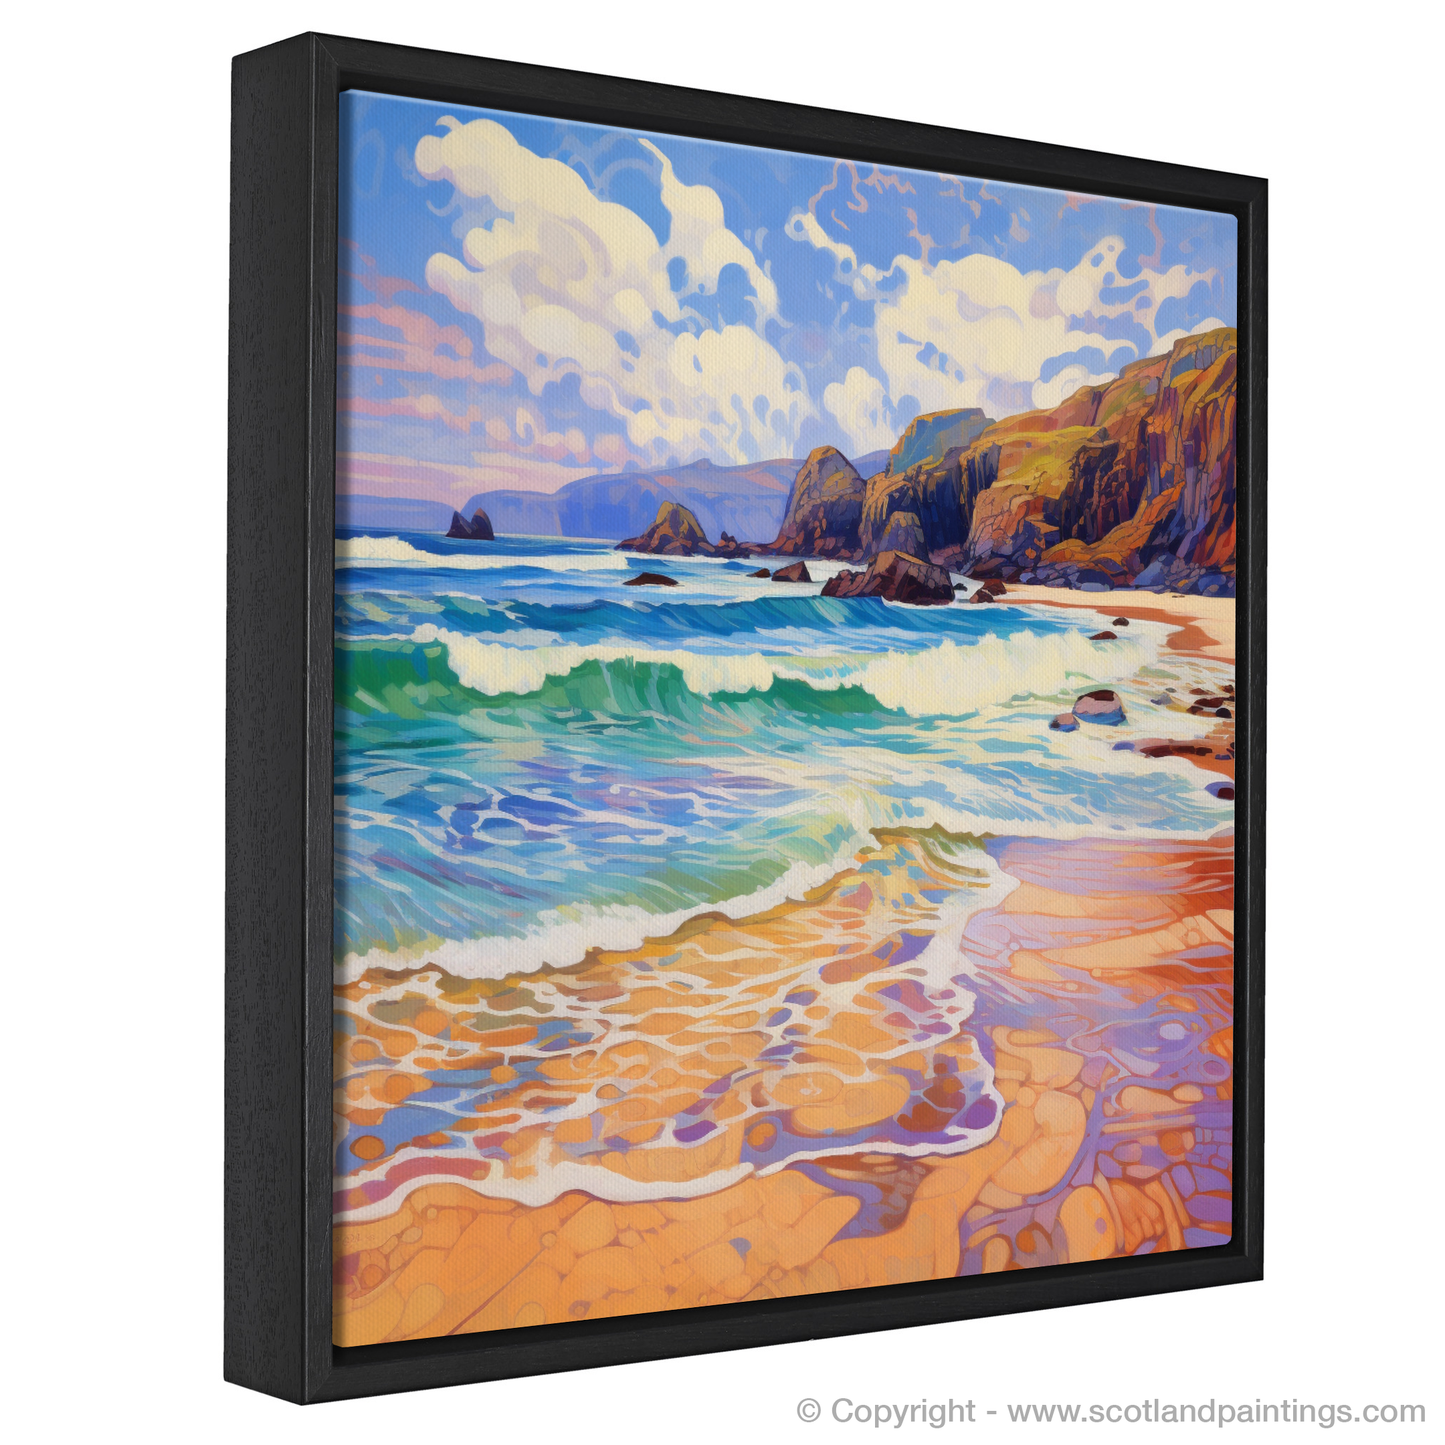 Painting and Art Print of Durness Beach, Sutherland in summer entitled "Summer Serenade at Durness Beach".